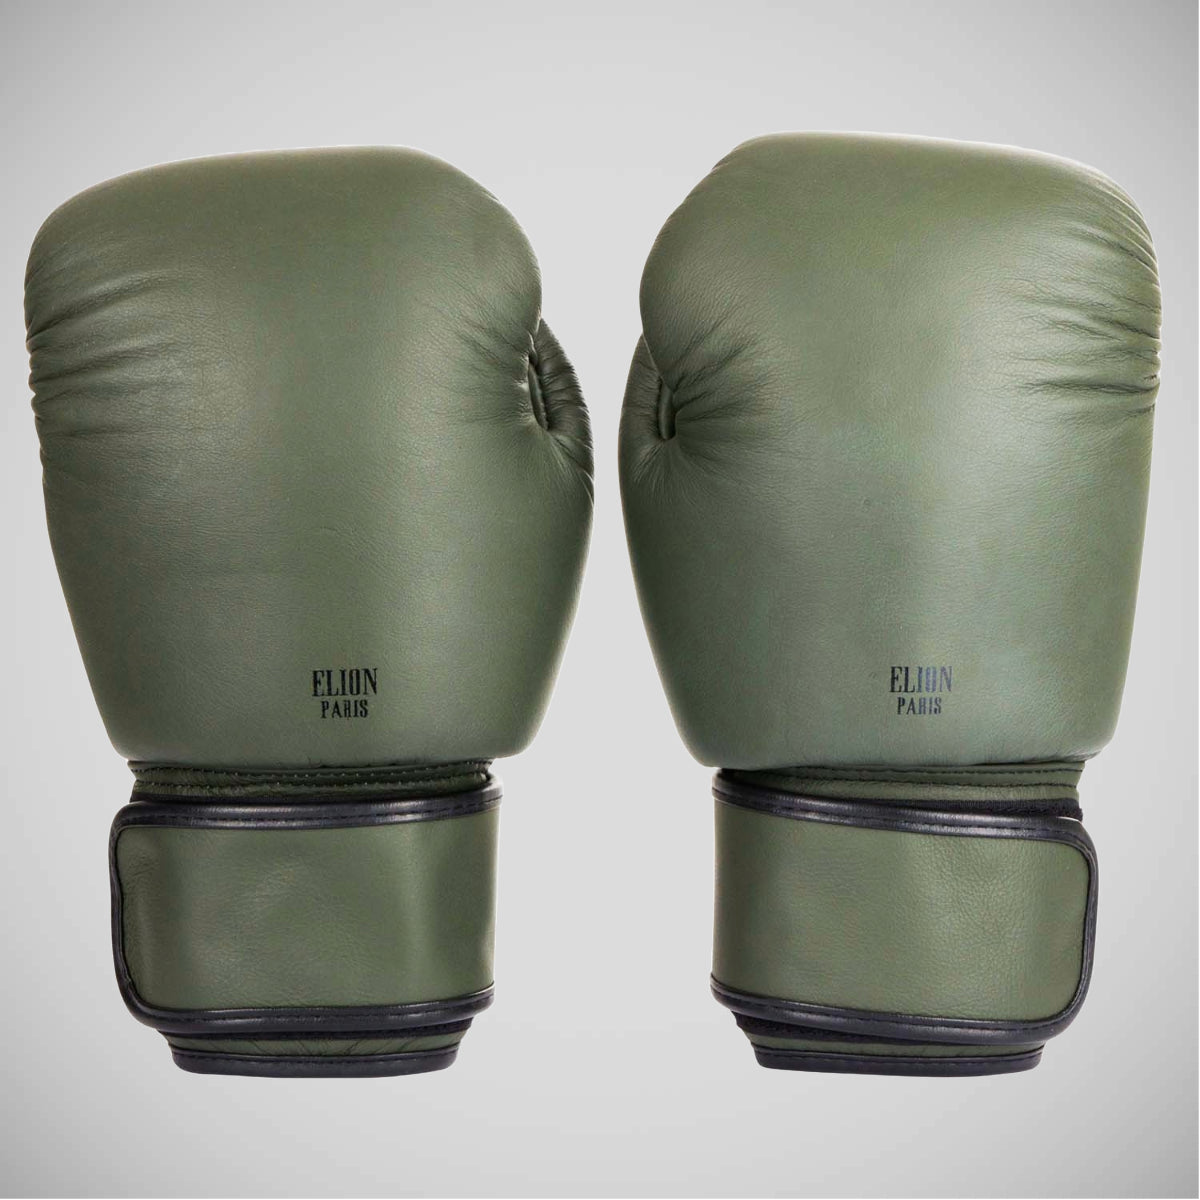 Boxing gloves Leone 1947 Military Edition green 